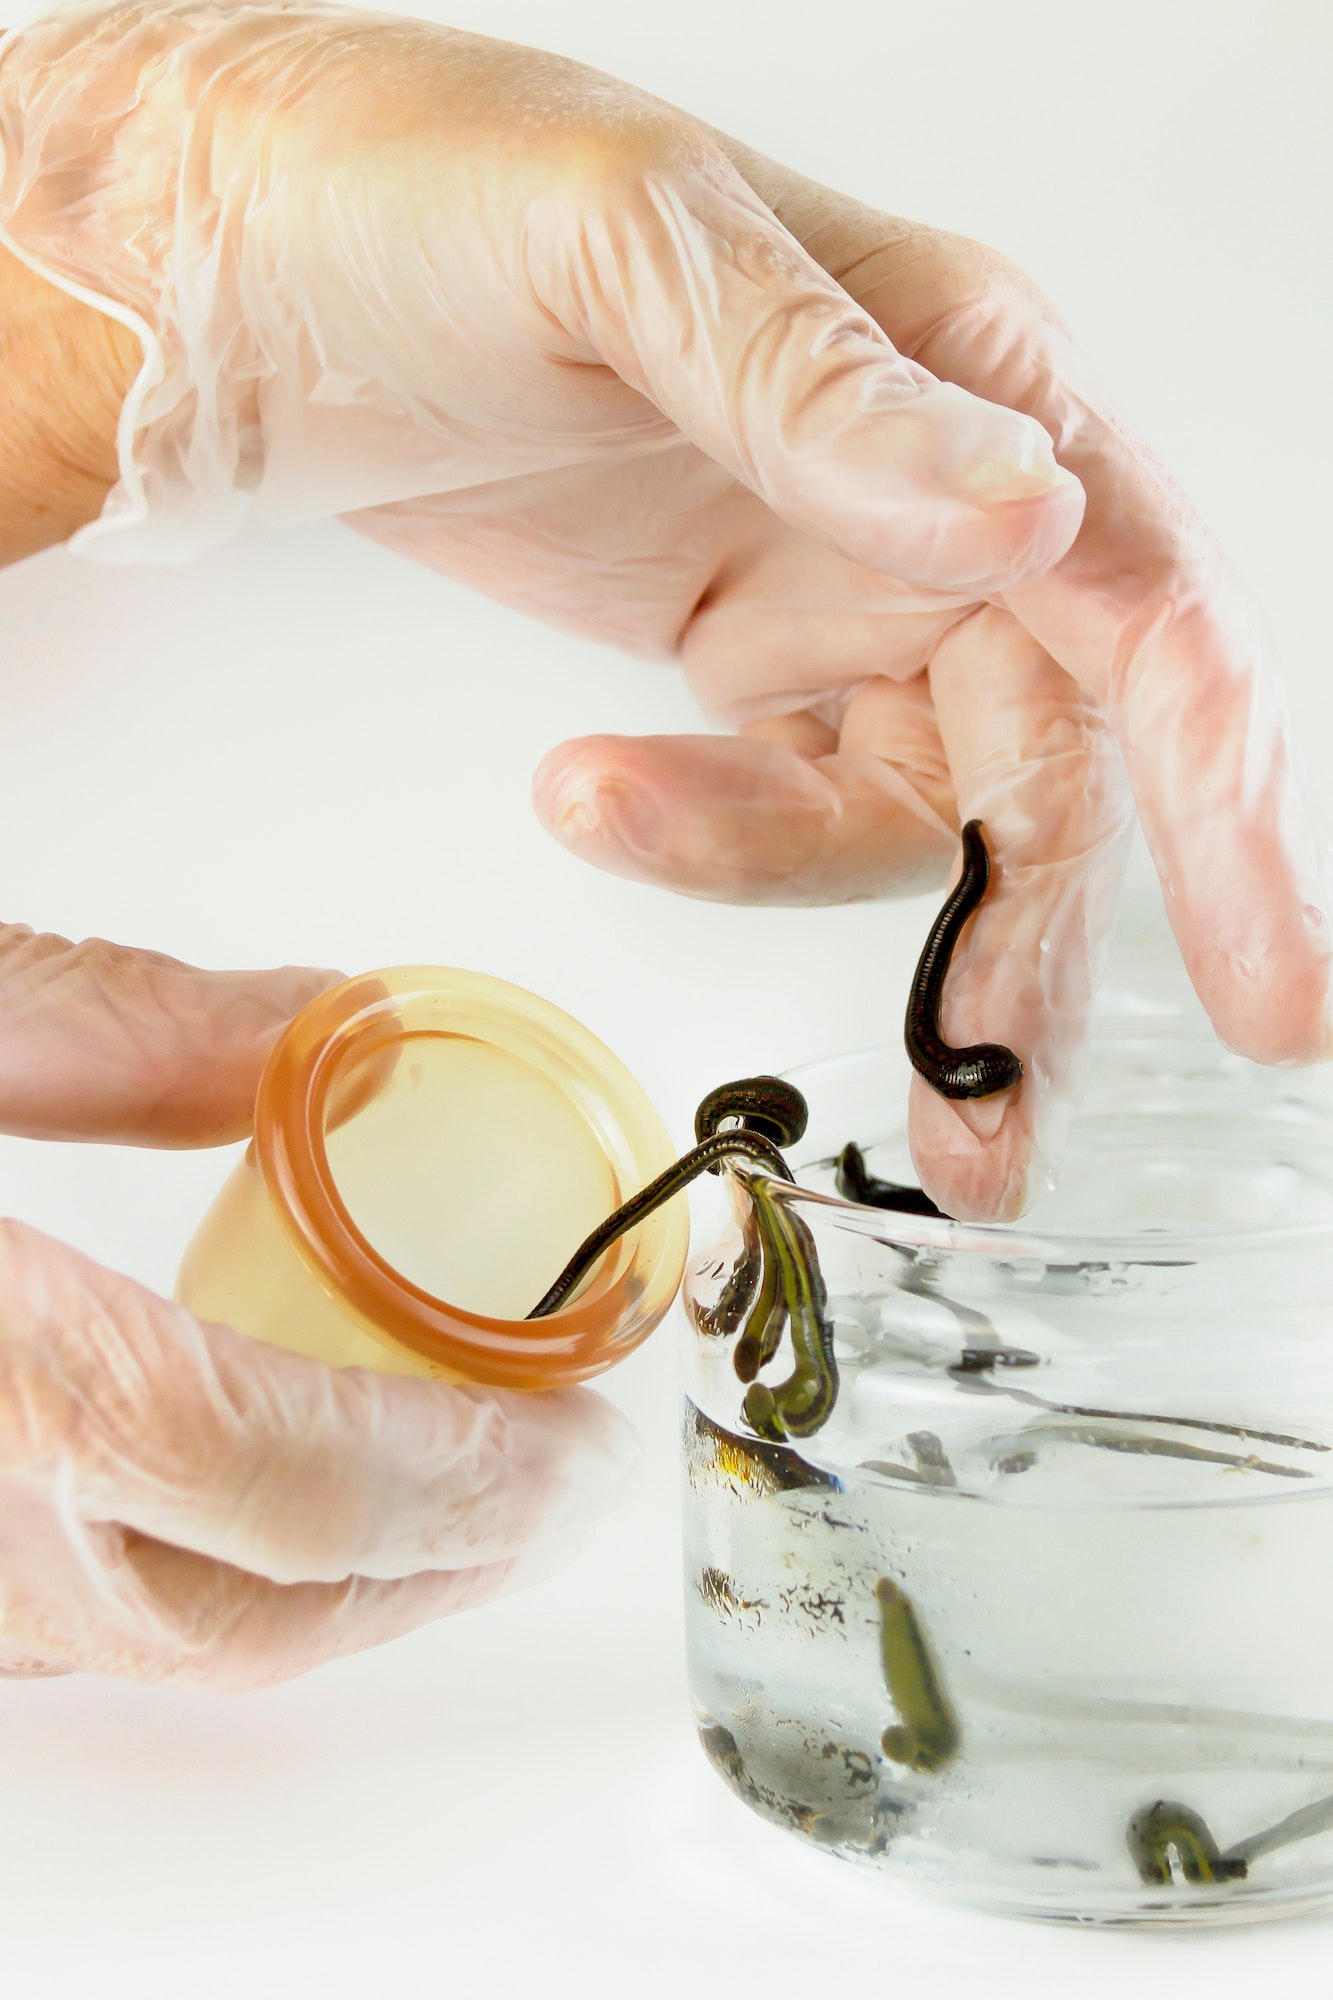 the hand in a medical glove pulls a leech out of a jar of water for placing on the patient